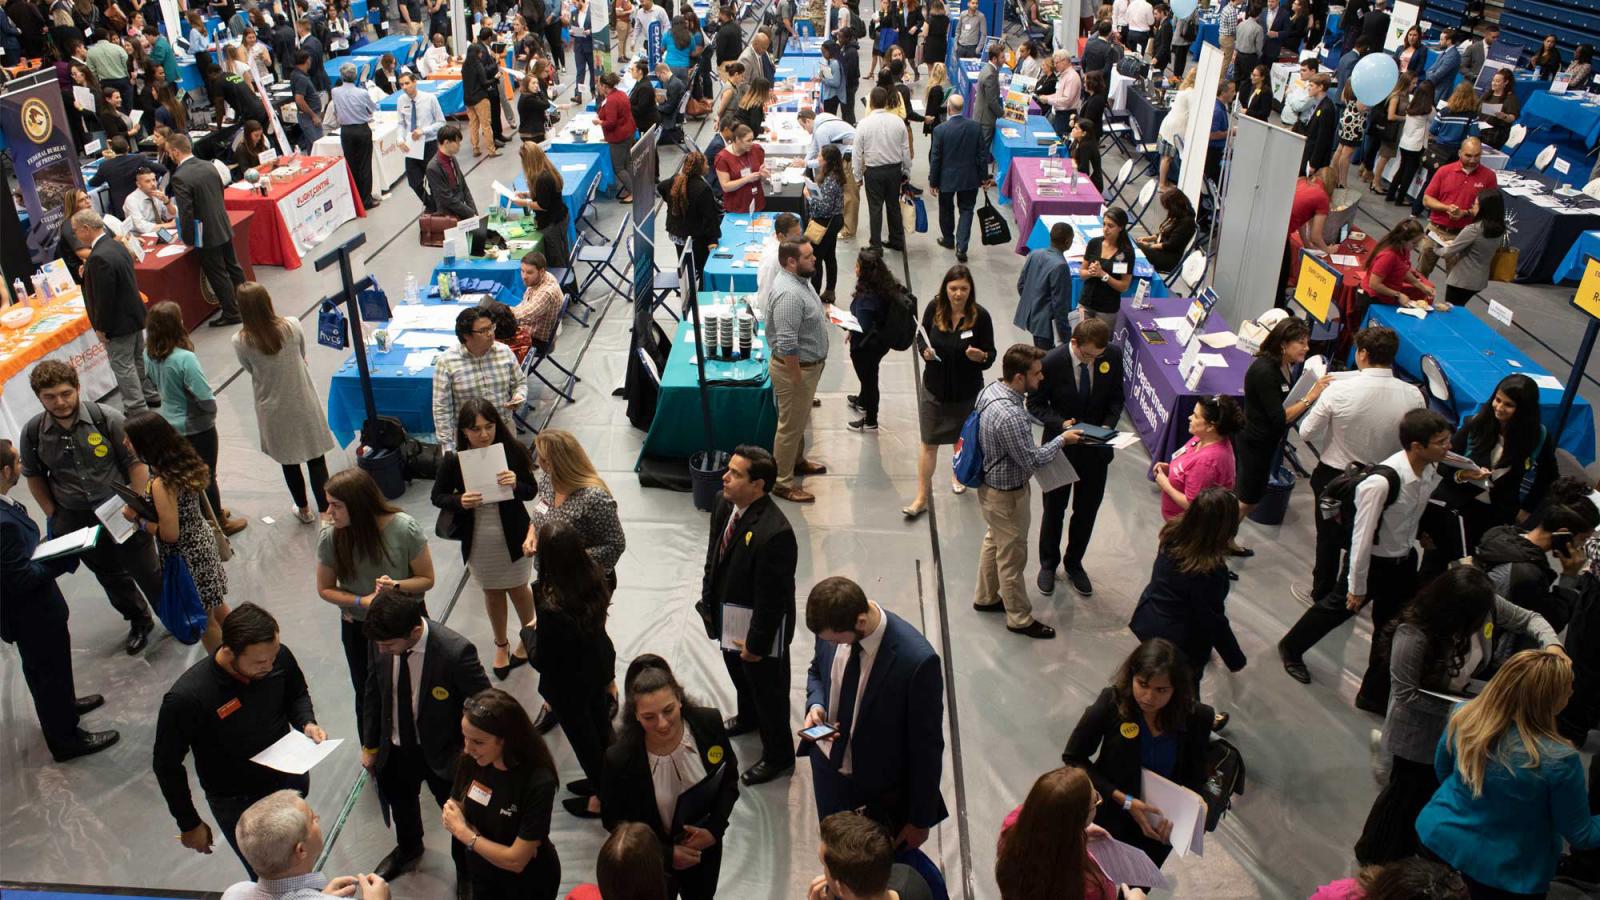 Students at a Career Services fair.